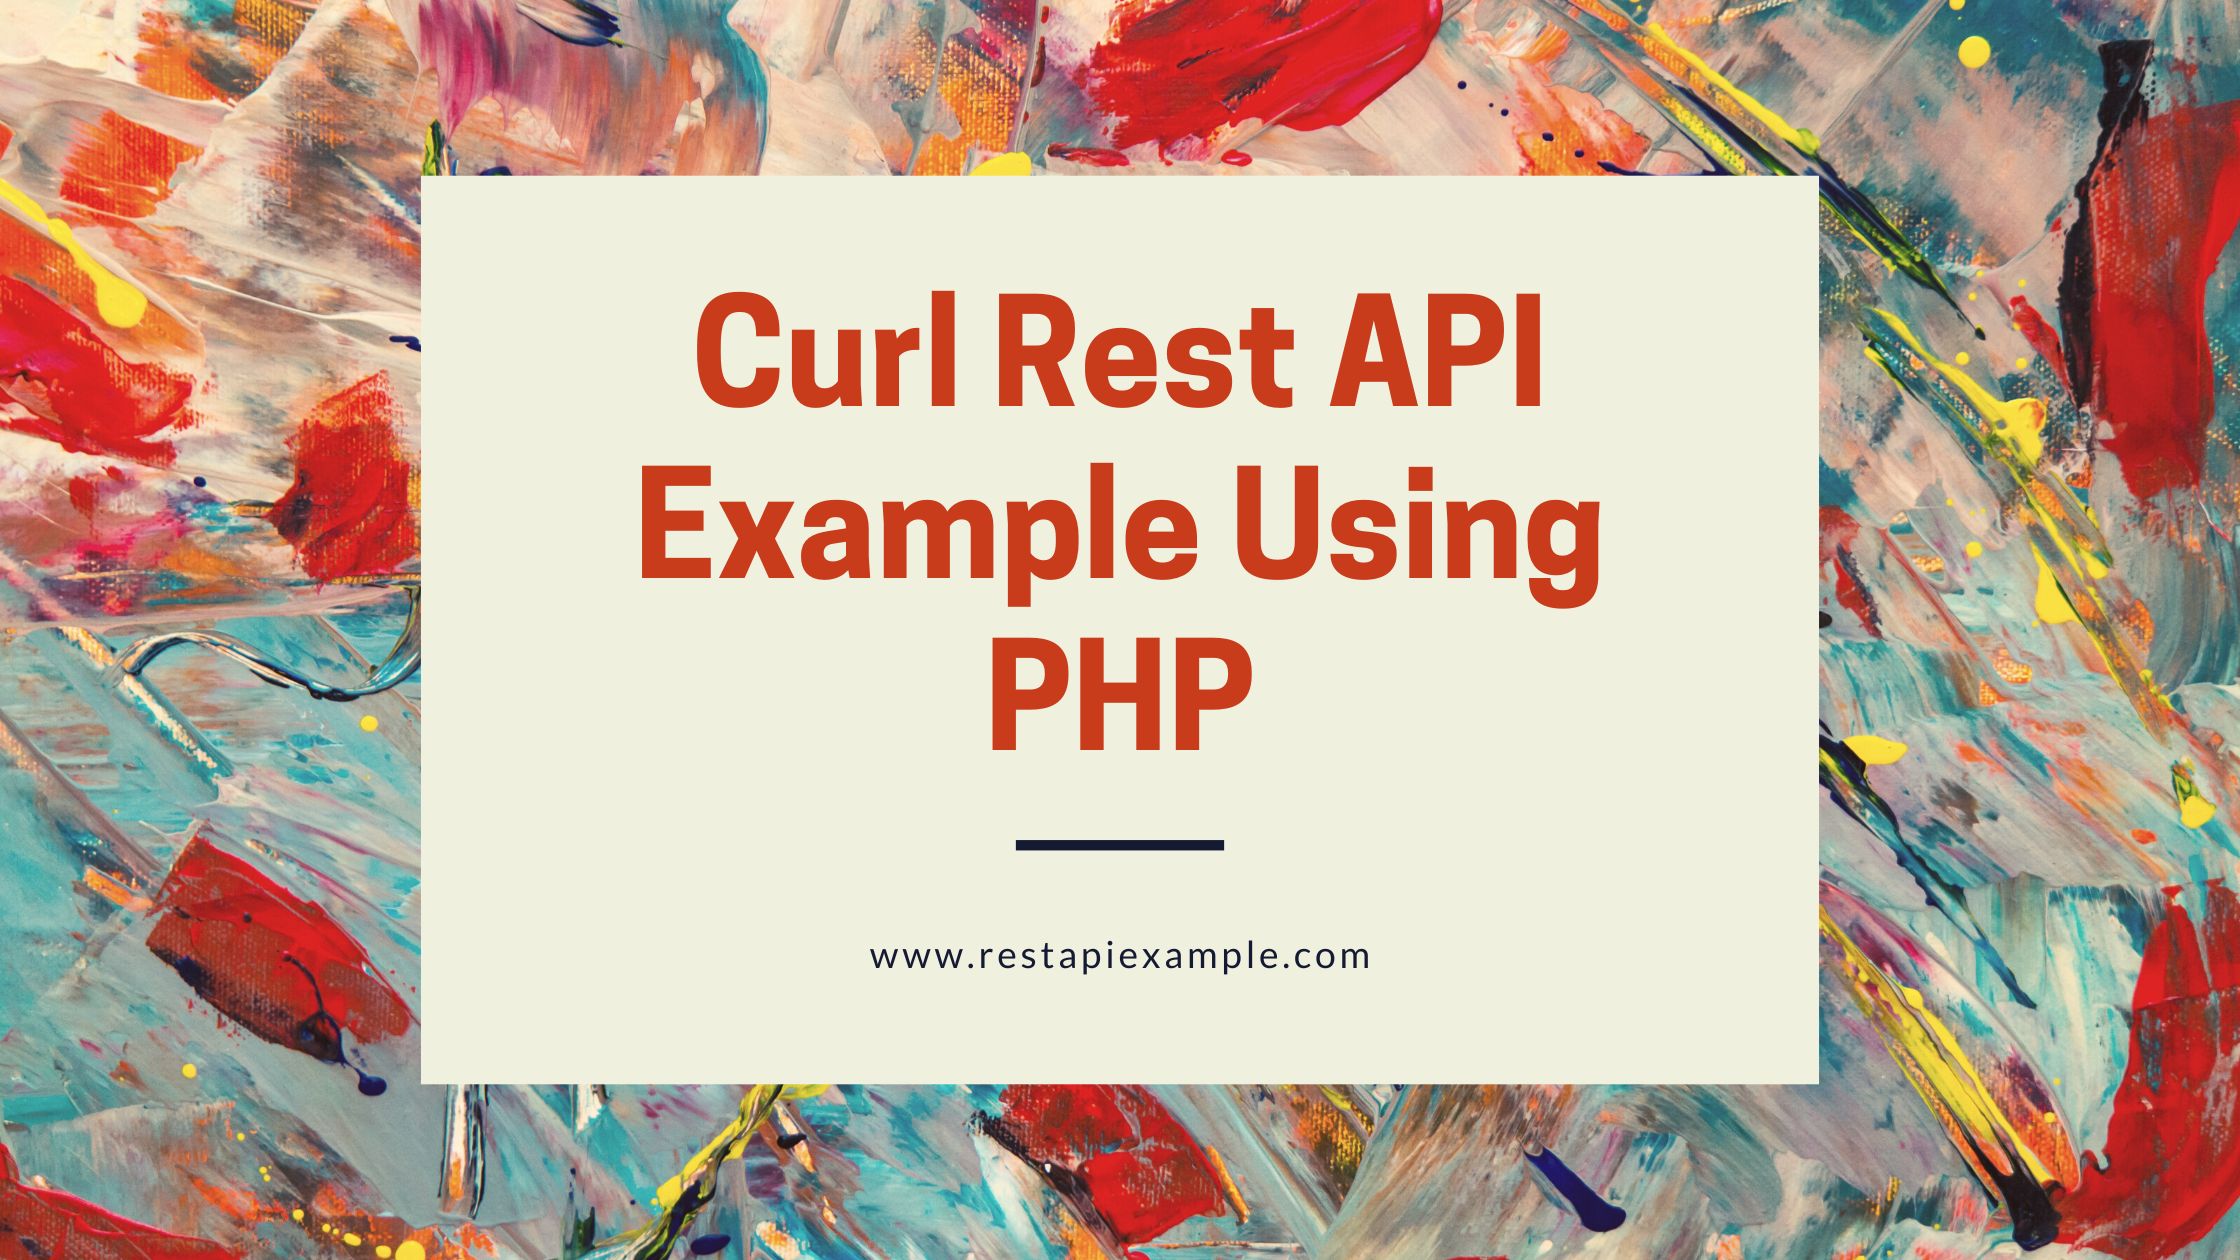 Curl Rest API Examplae Using PHP